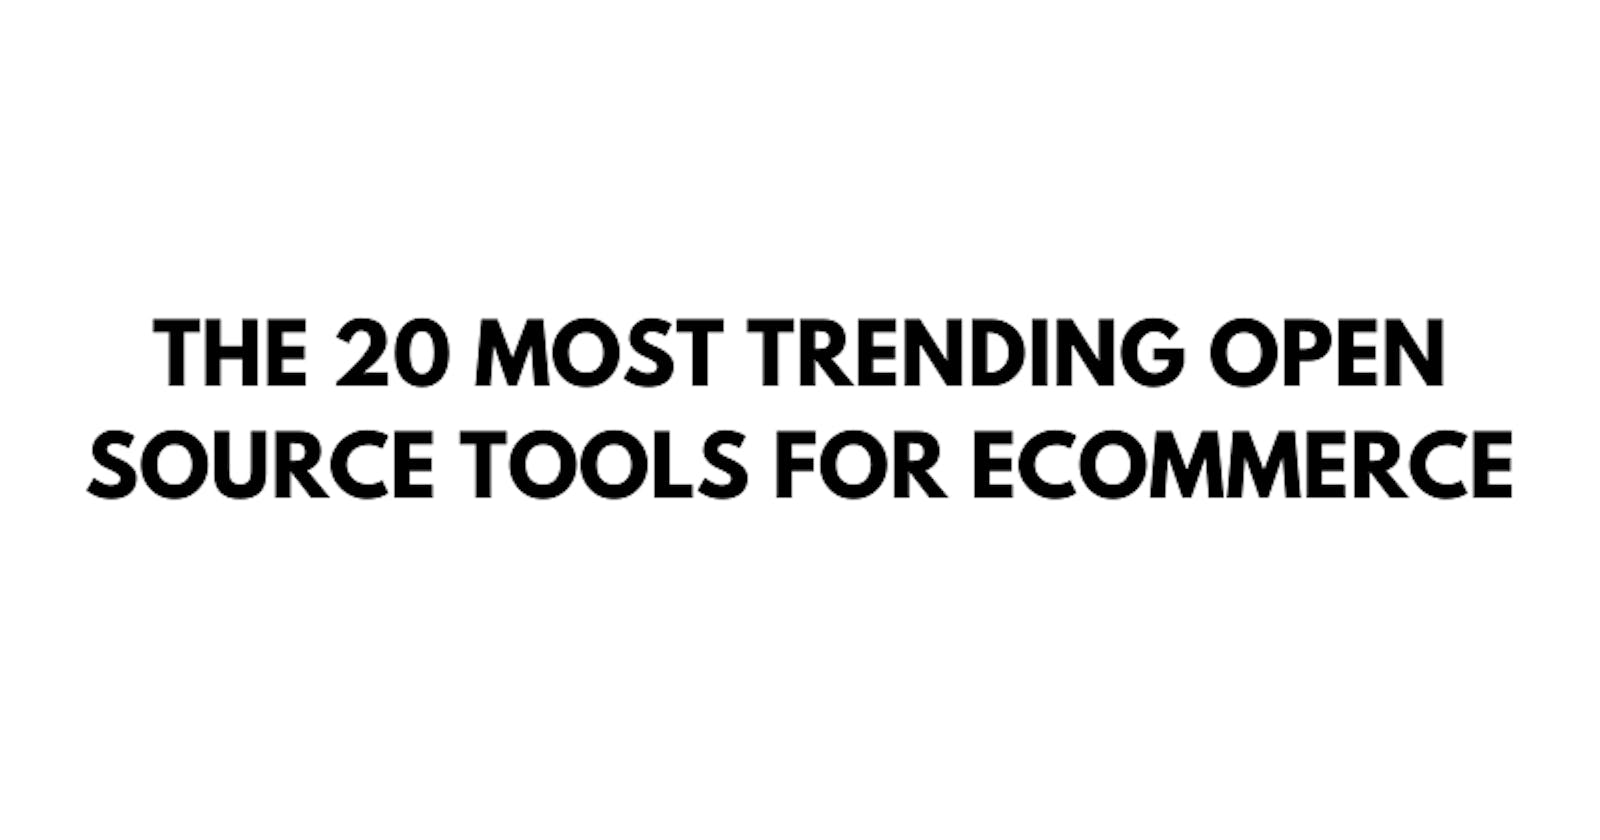 The 20 Most Trending Open Source Tools for Ecommerce